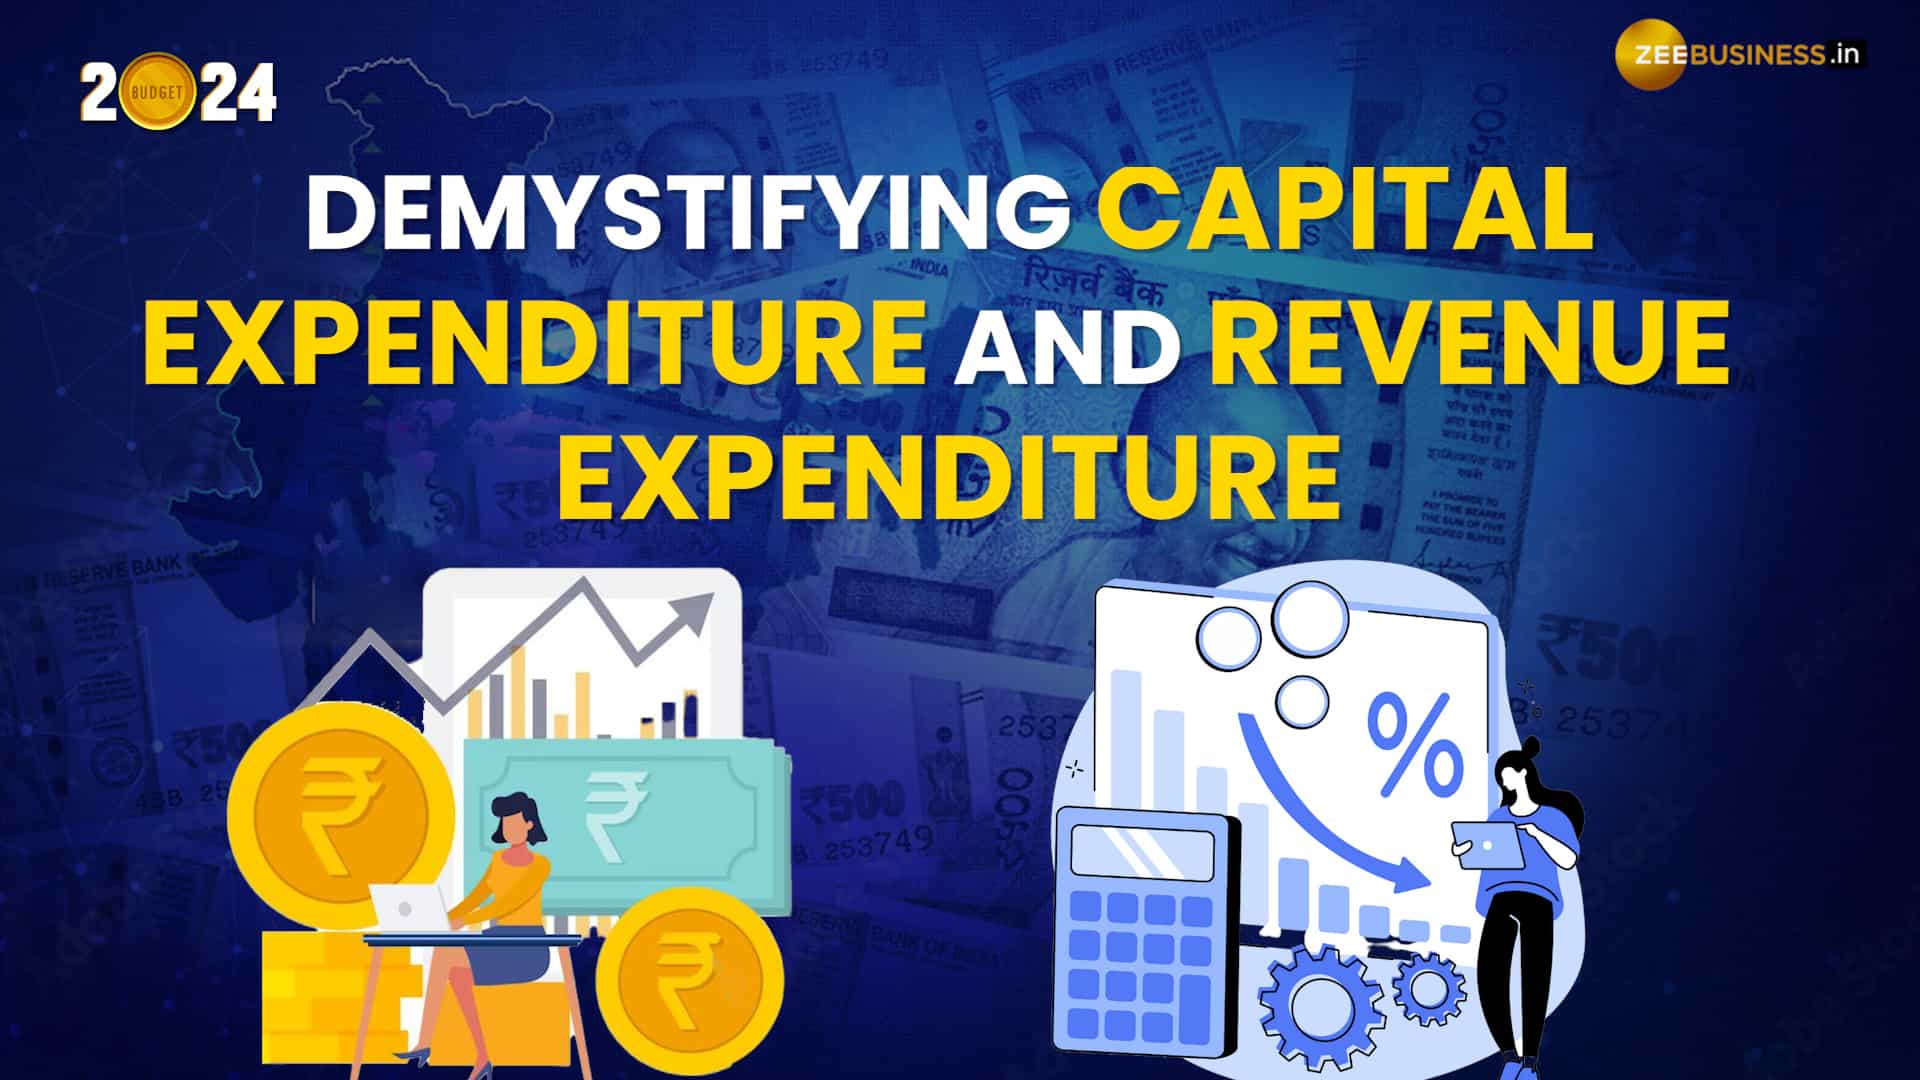 Union Budget 2024: Decoding the Difference Between Capital and Revenue Expenditure 